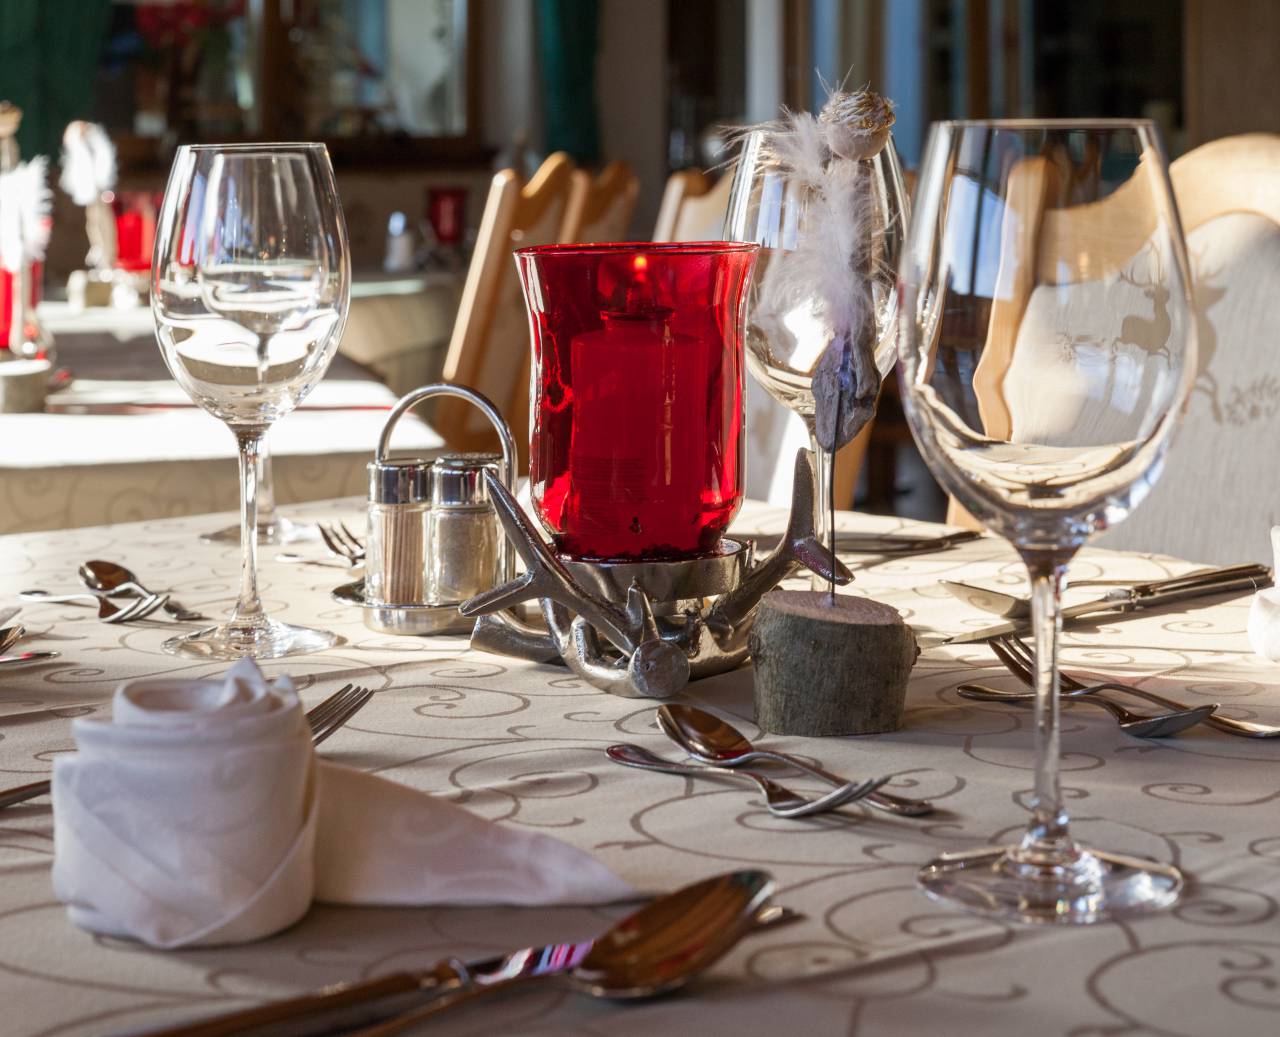 Festively decorated tables with candles, wine glasses and napkin flowers